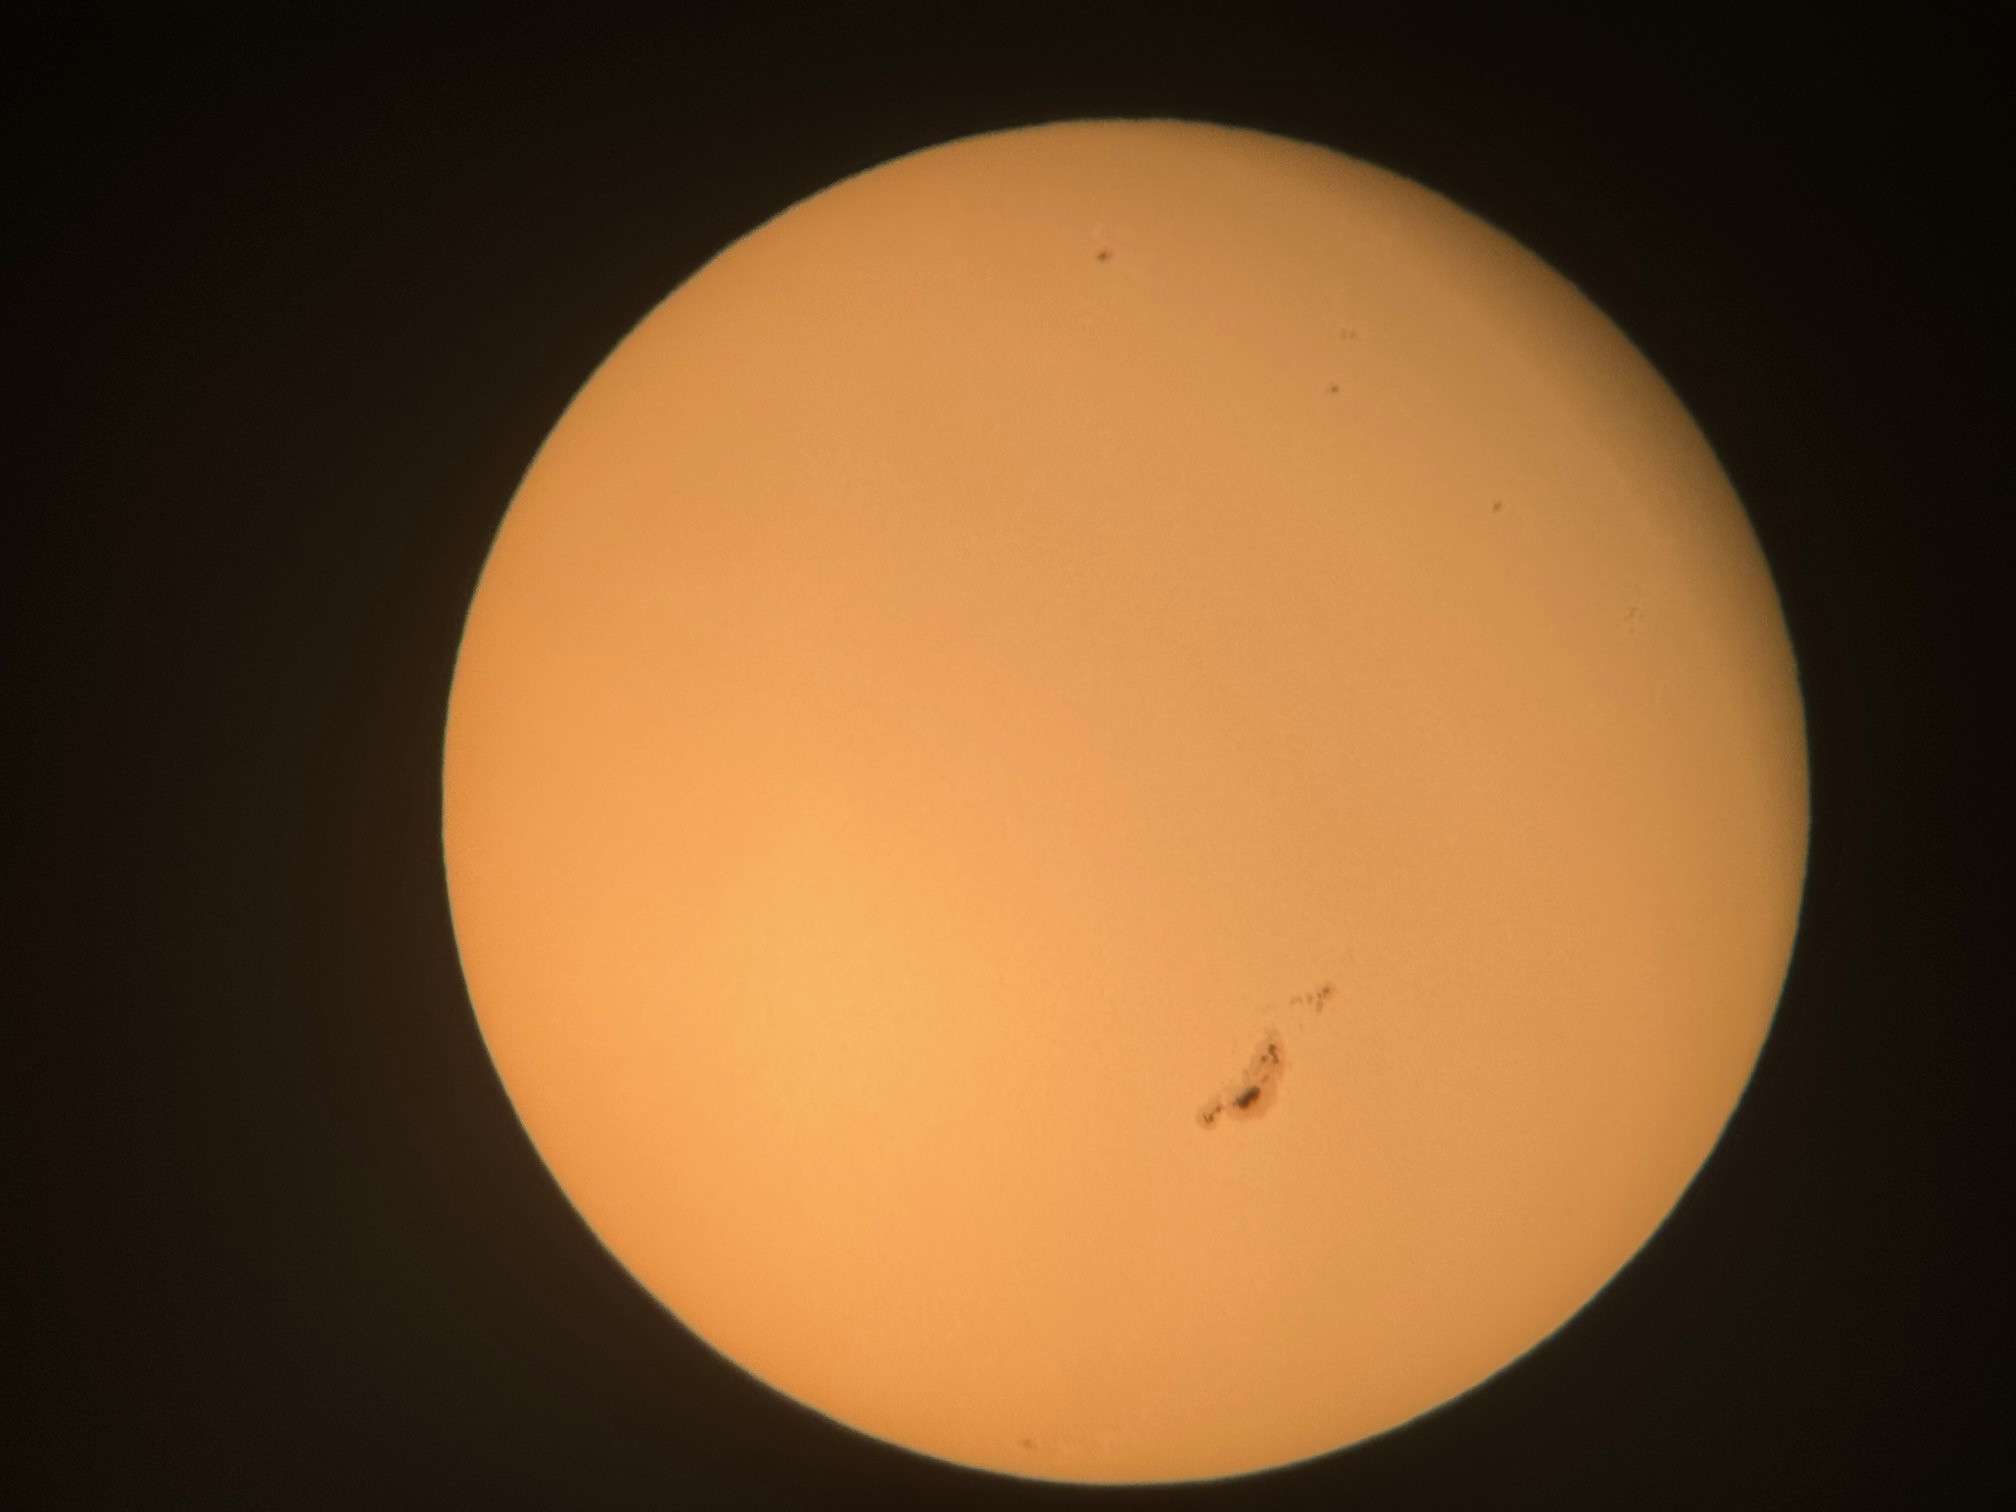 Photograph of sun with sunspots